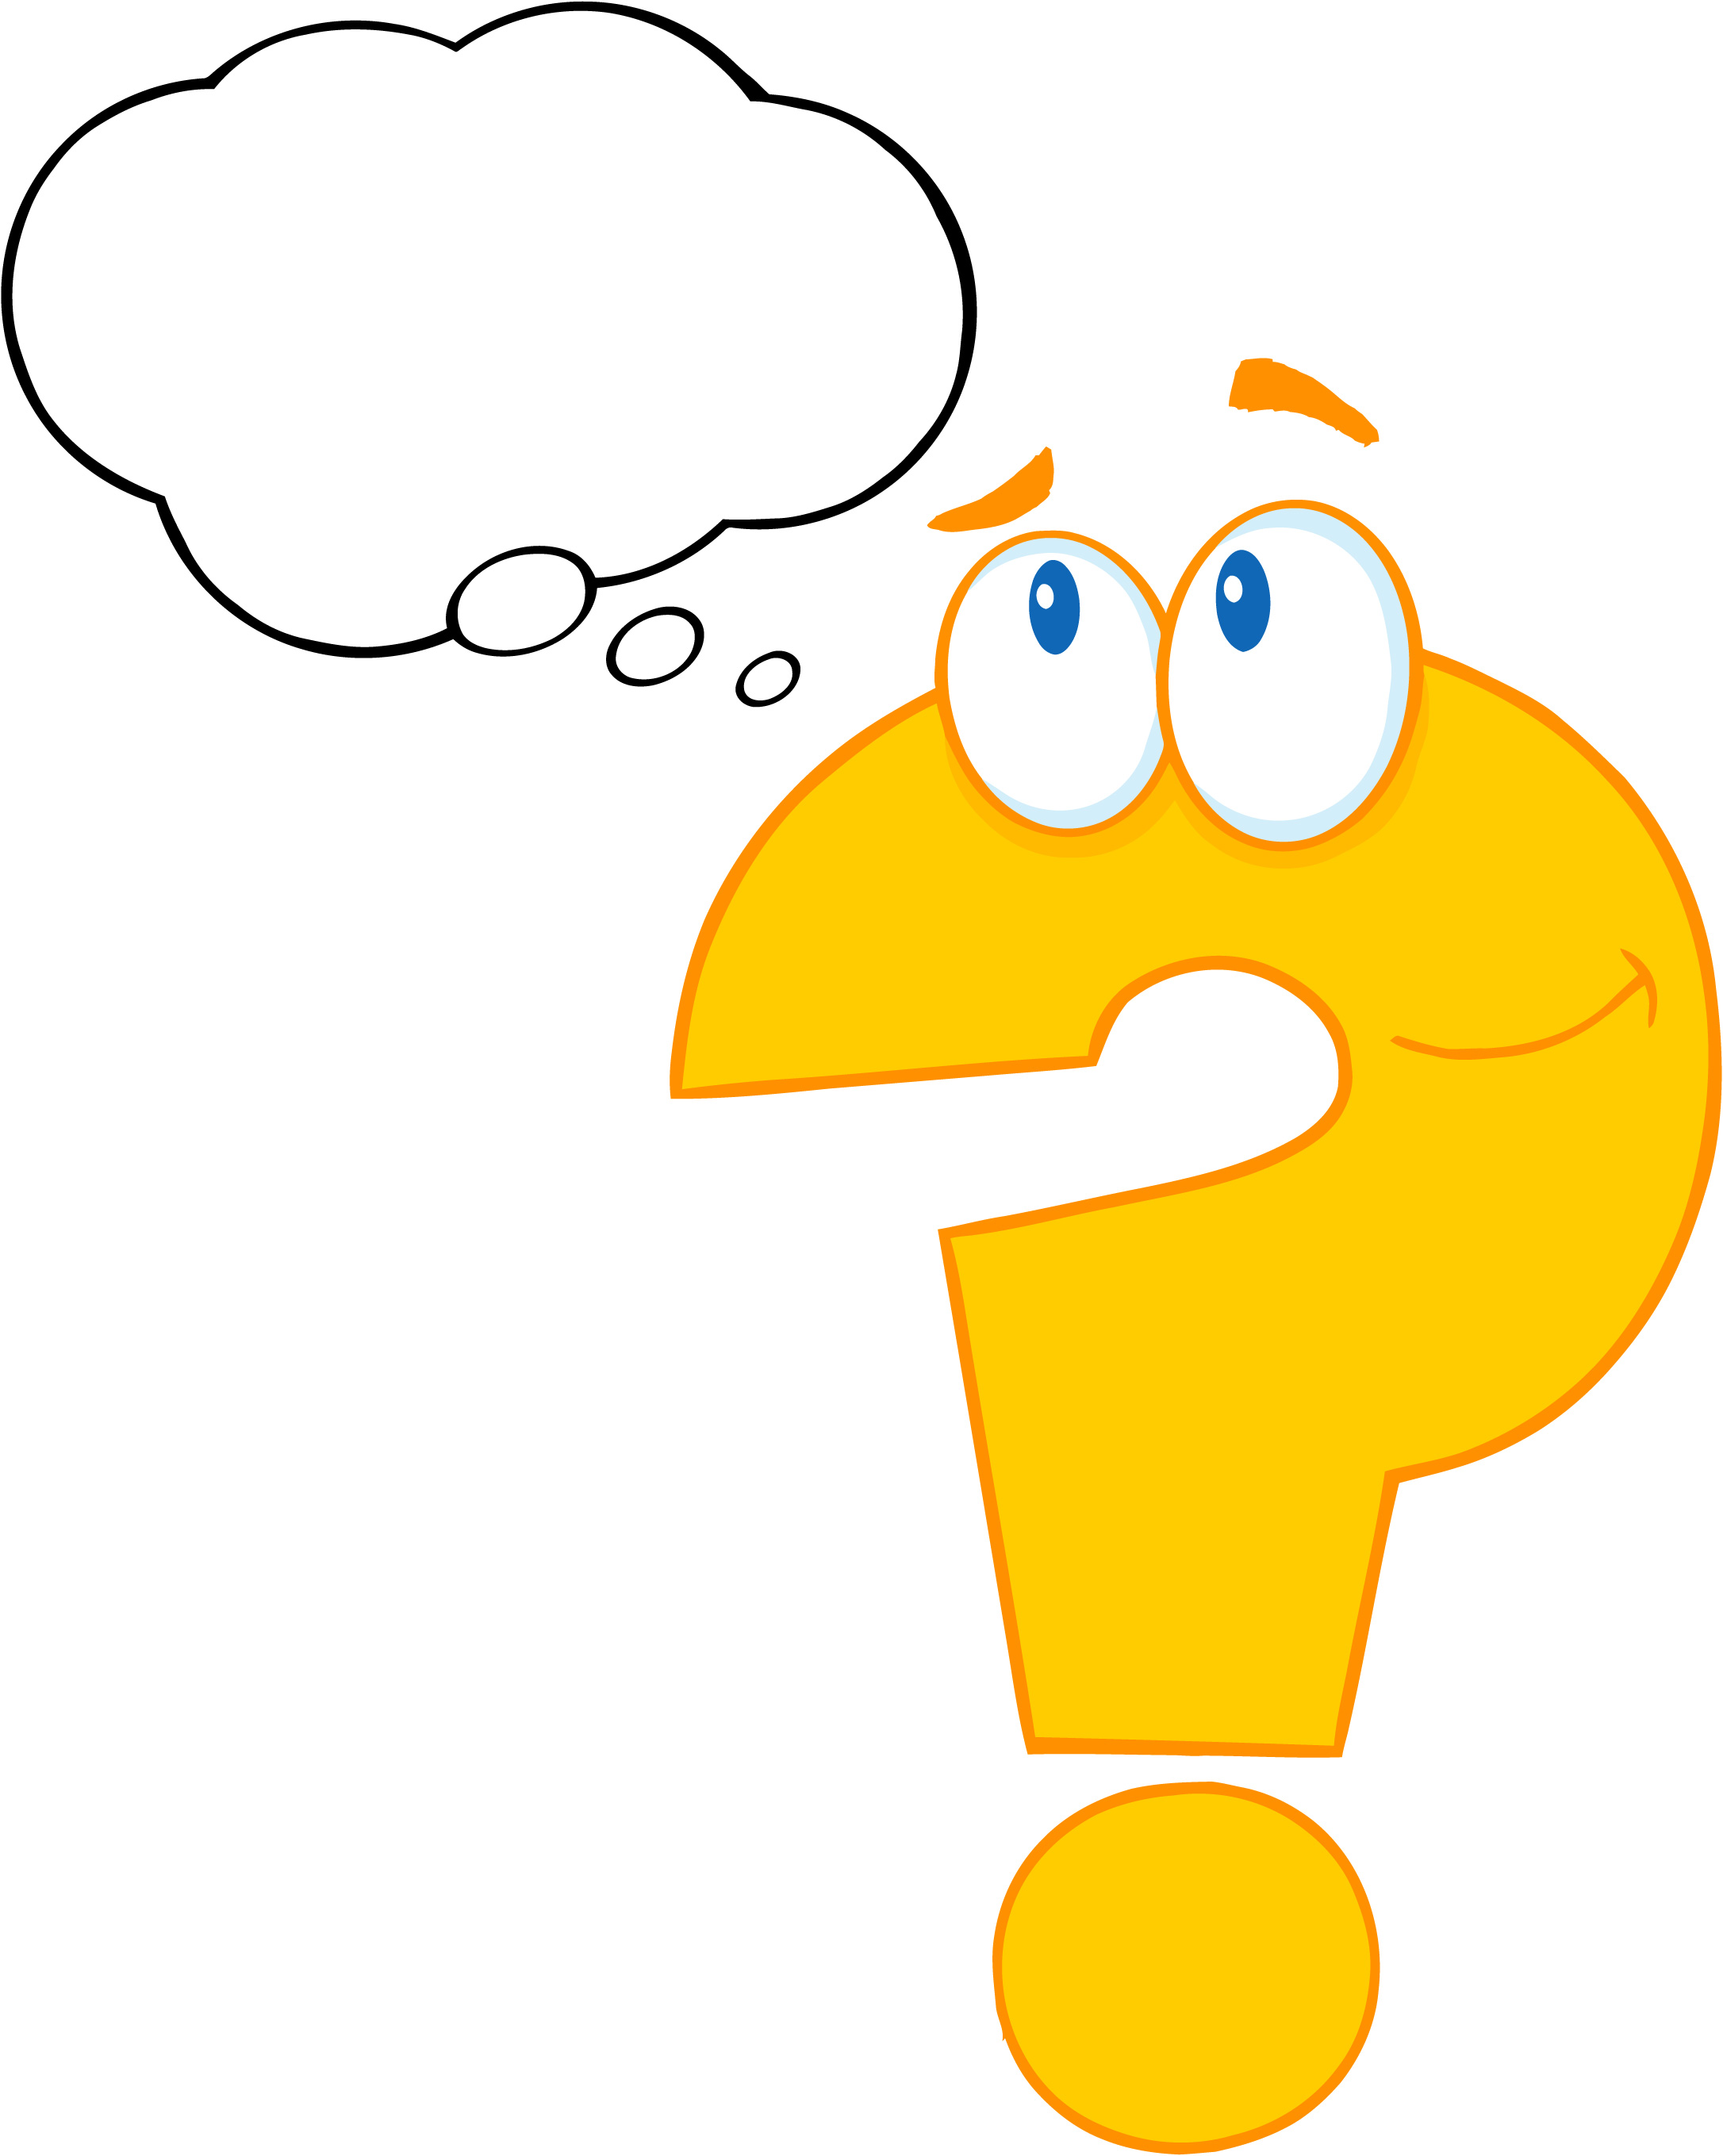 free question mark clipart - Clip Art Library